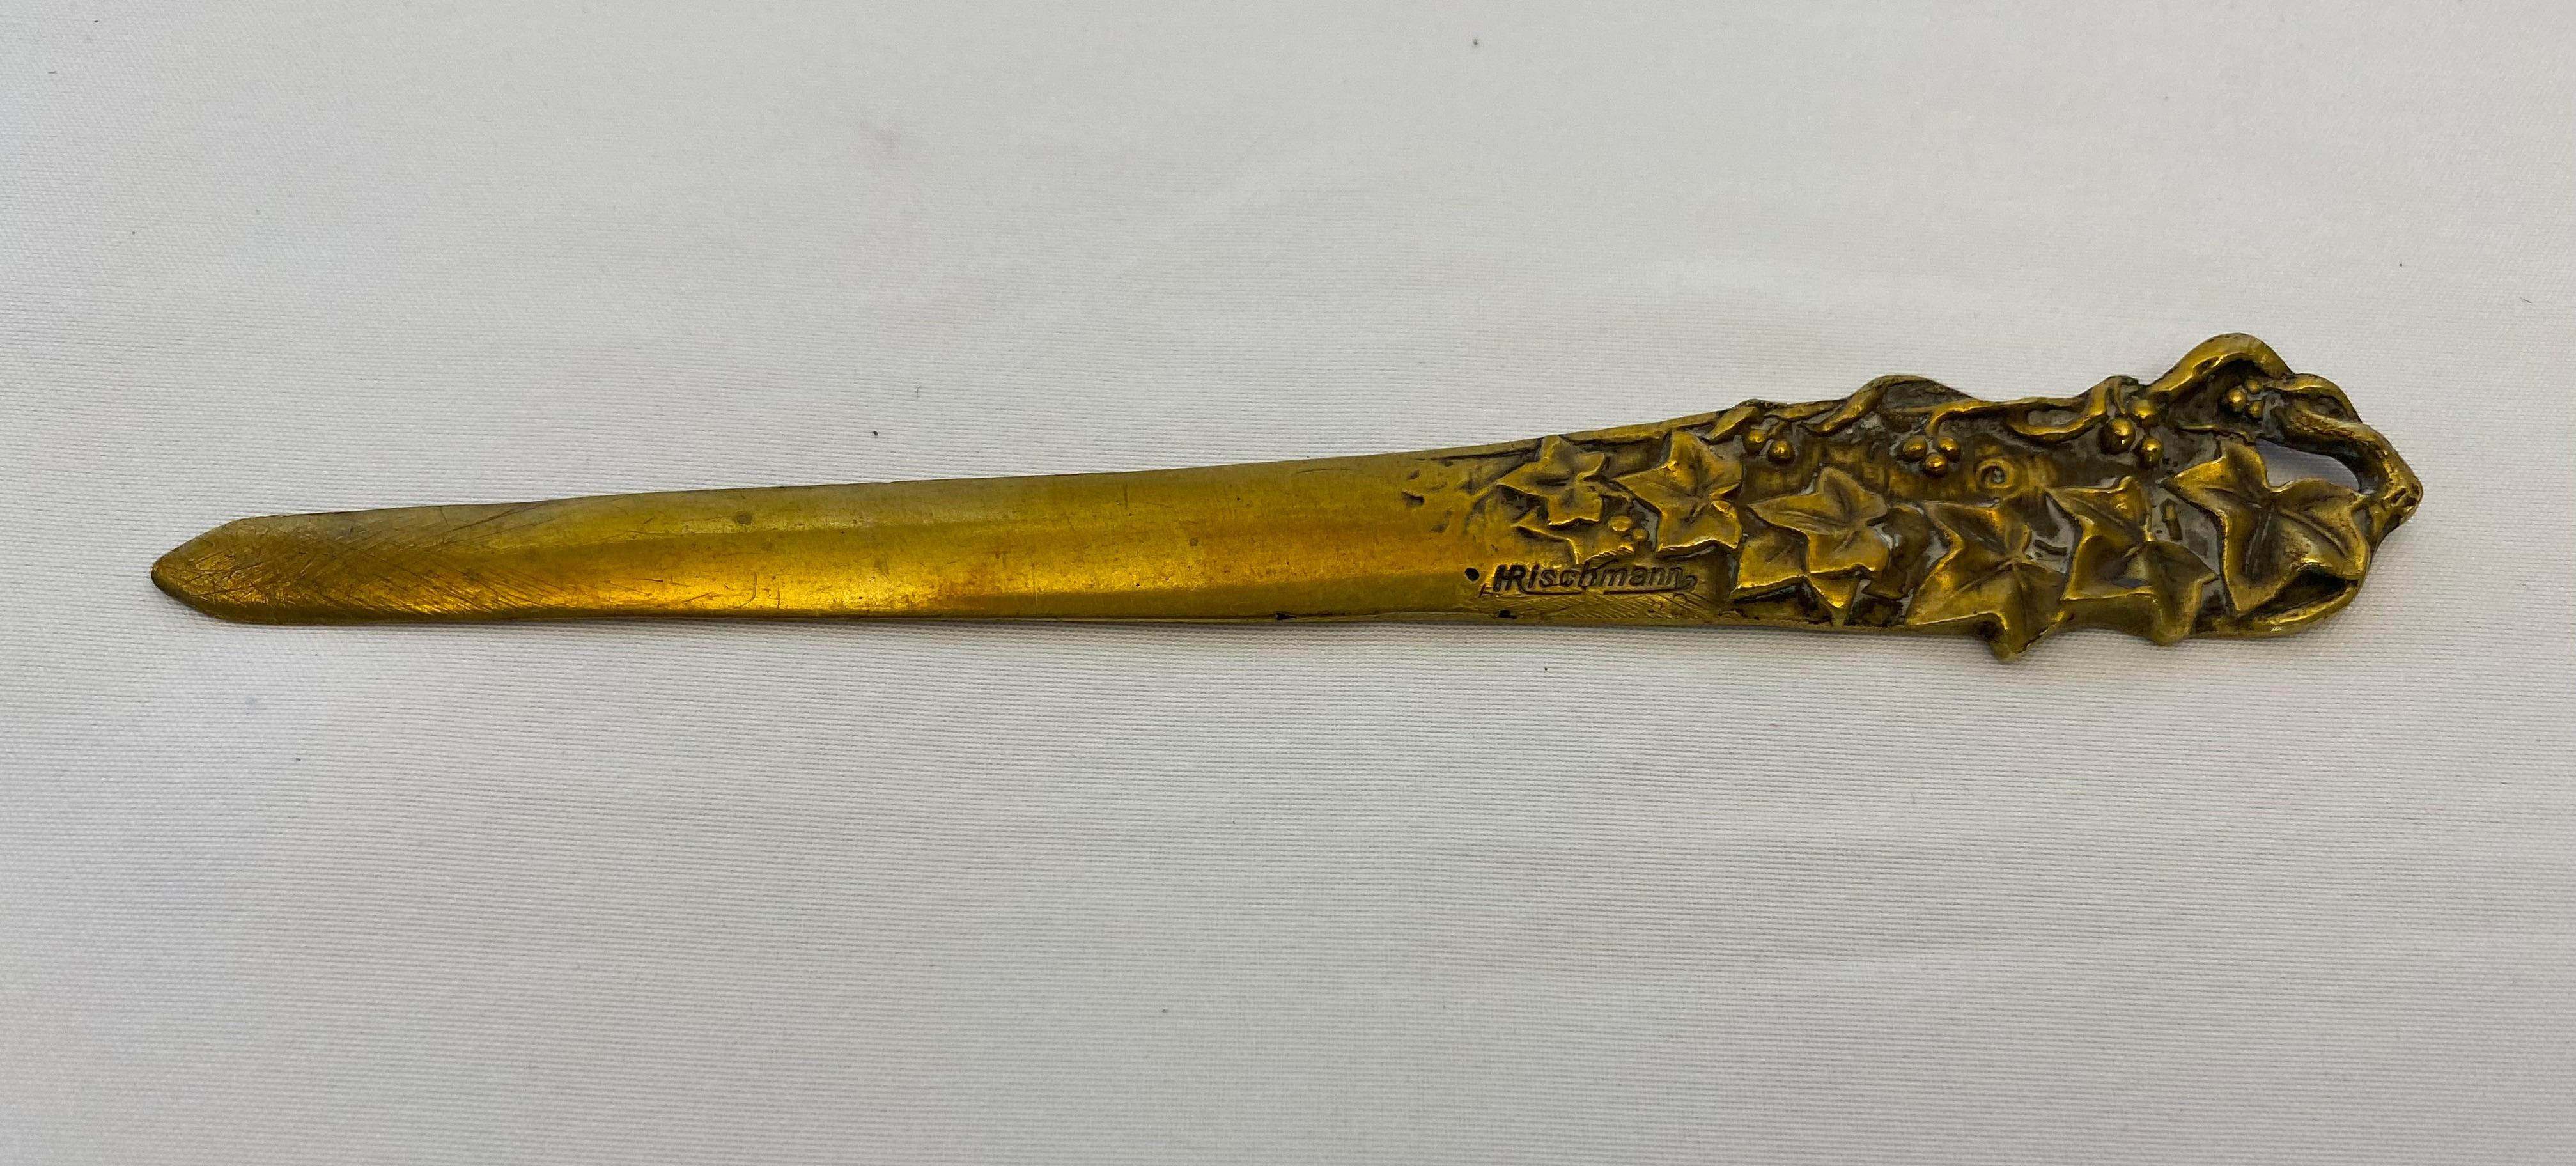 Art Nouveau Bronze Letter Opener or Paper Knife, Signed E. Rischmann In Good Condition For Sale In Miami, FL